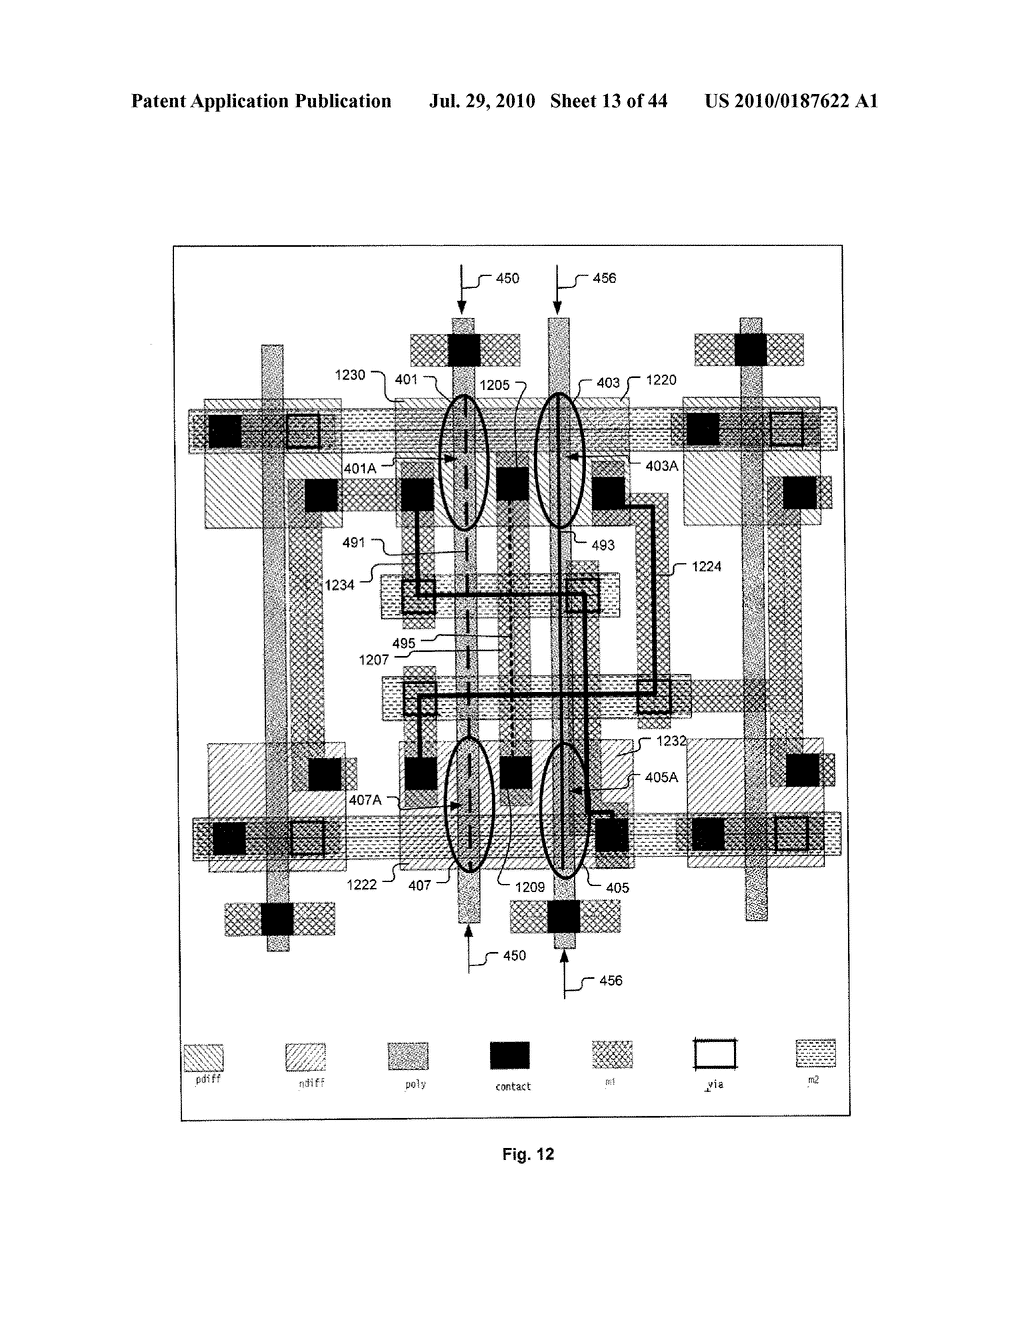 Linear Gate Level Cross-Coupled Transistor Device with Complimentary Pairs of Cross-Coupled Transistors Defined by Physically Separate Gate Electrodes within Gate Electrode Level - diagram, schematic, and image 14